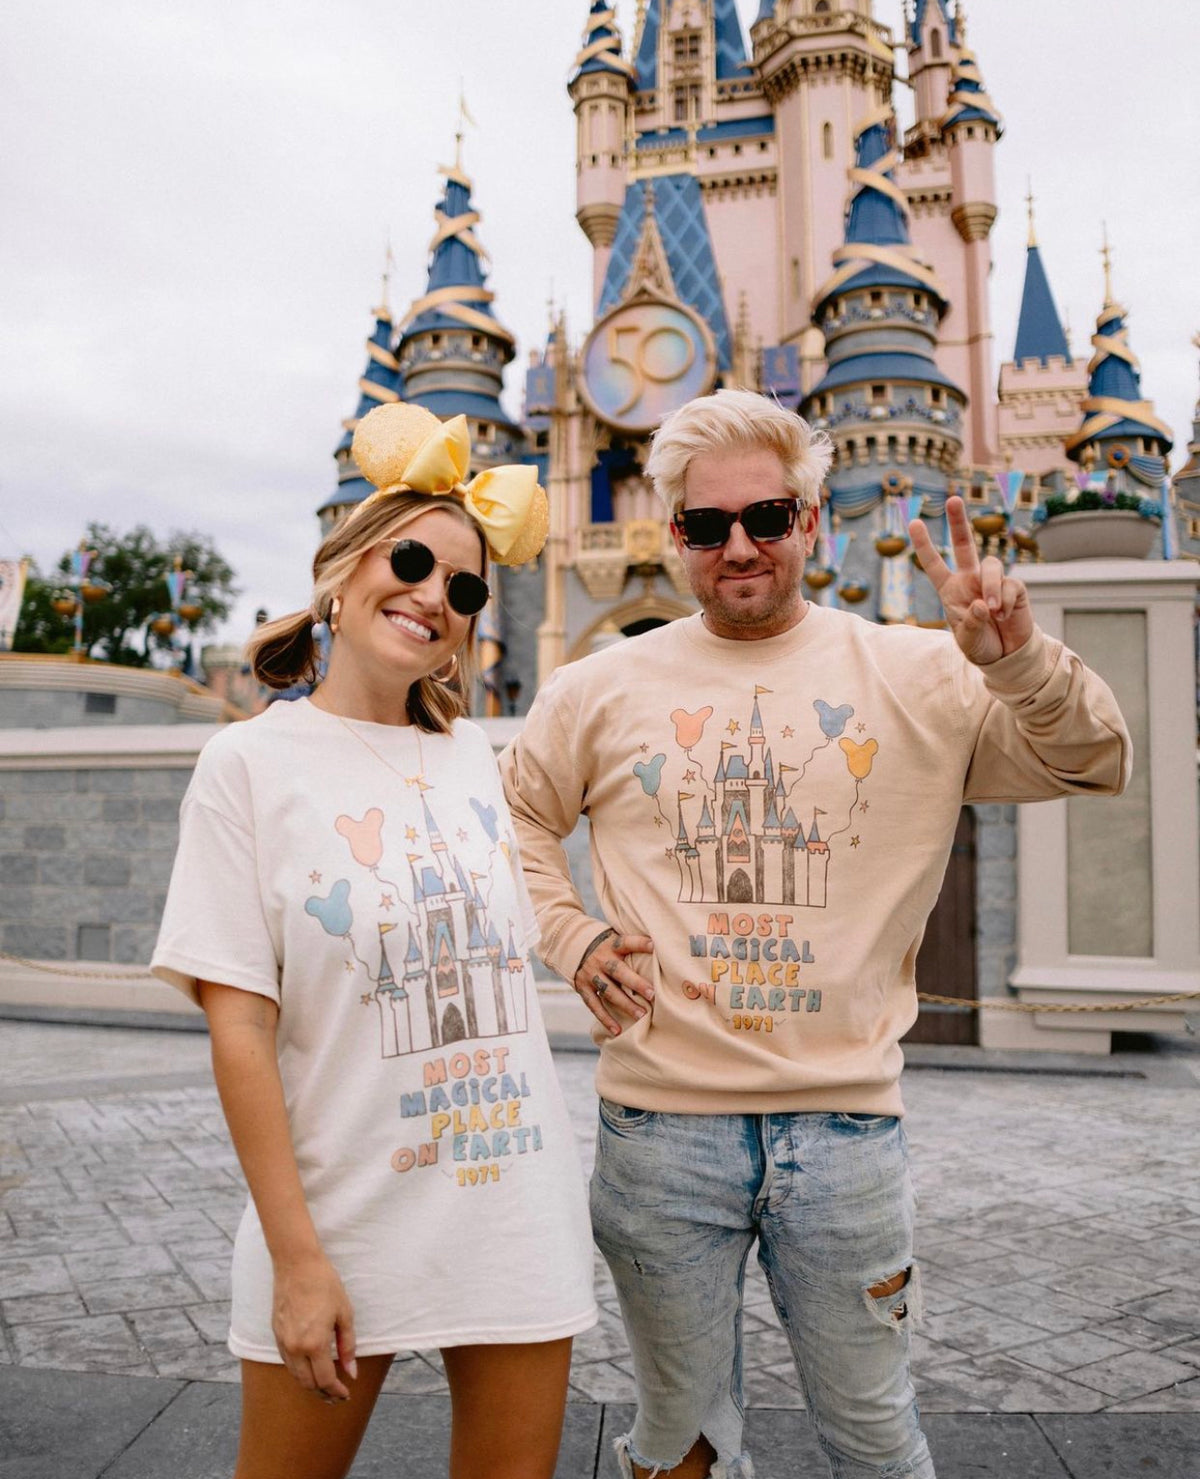 Most Magical Place On Earth Tee